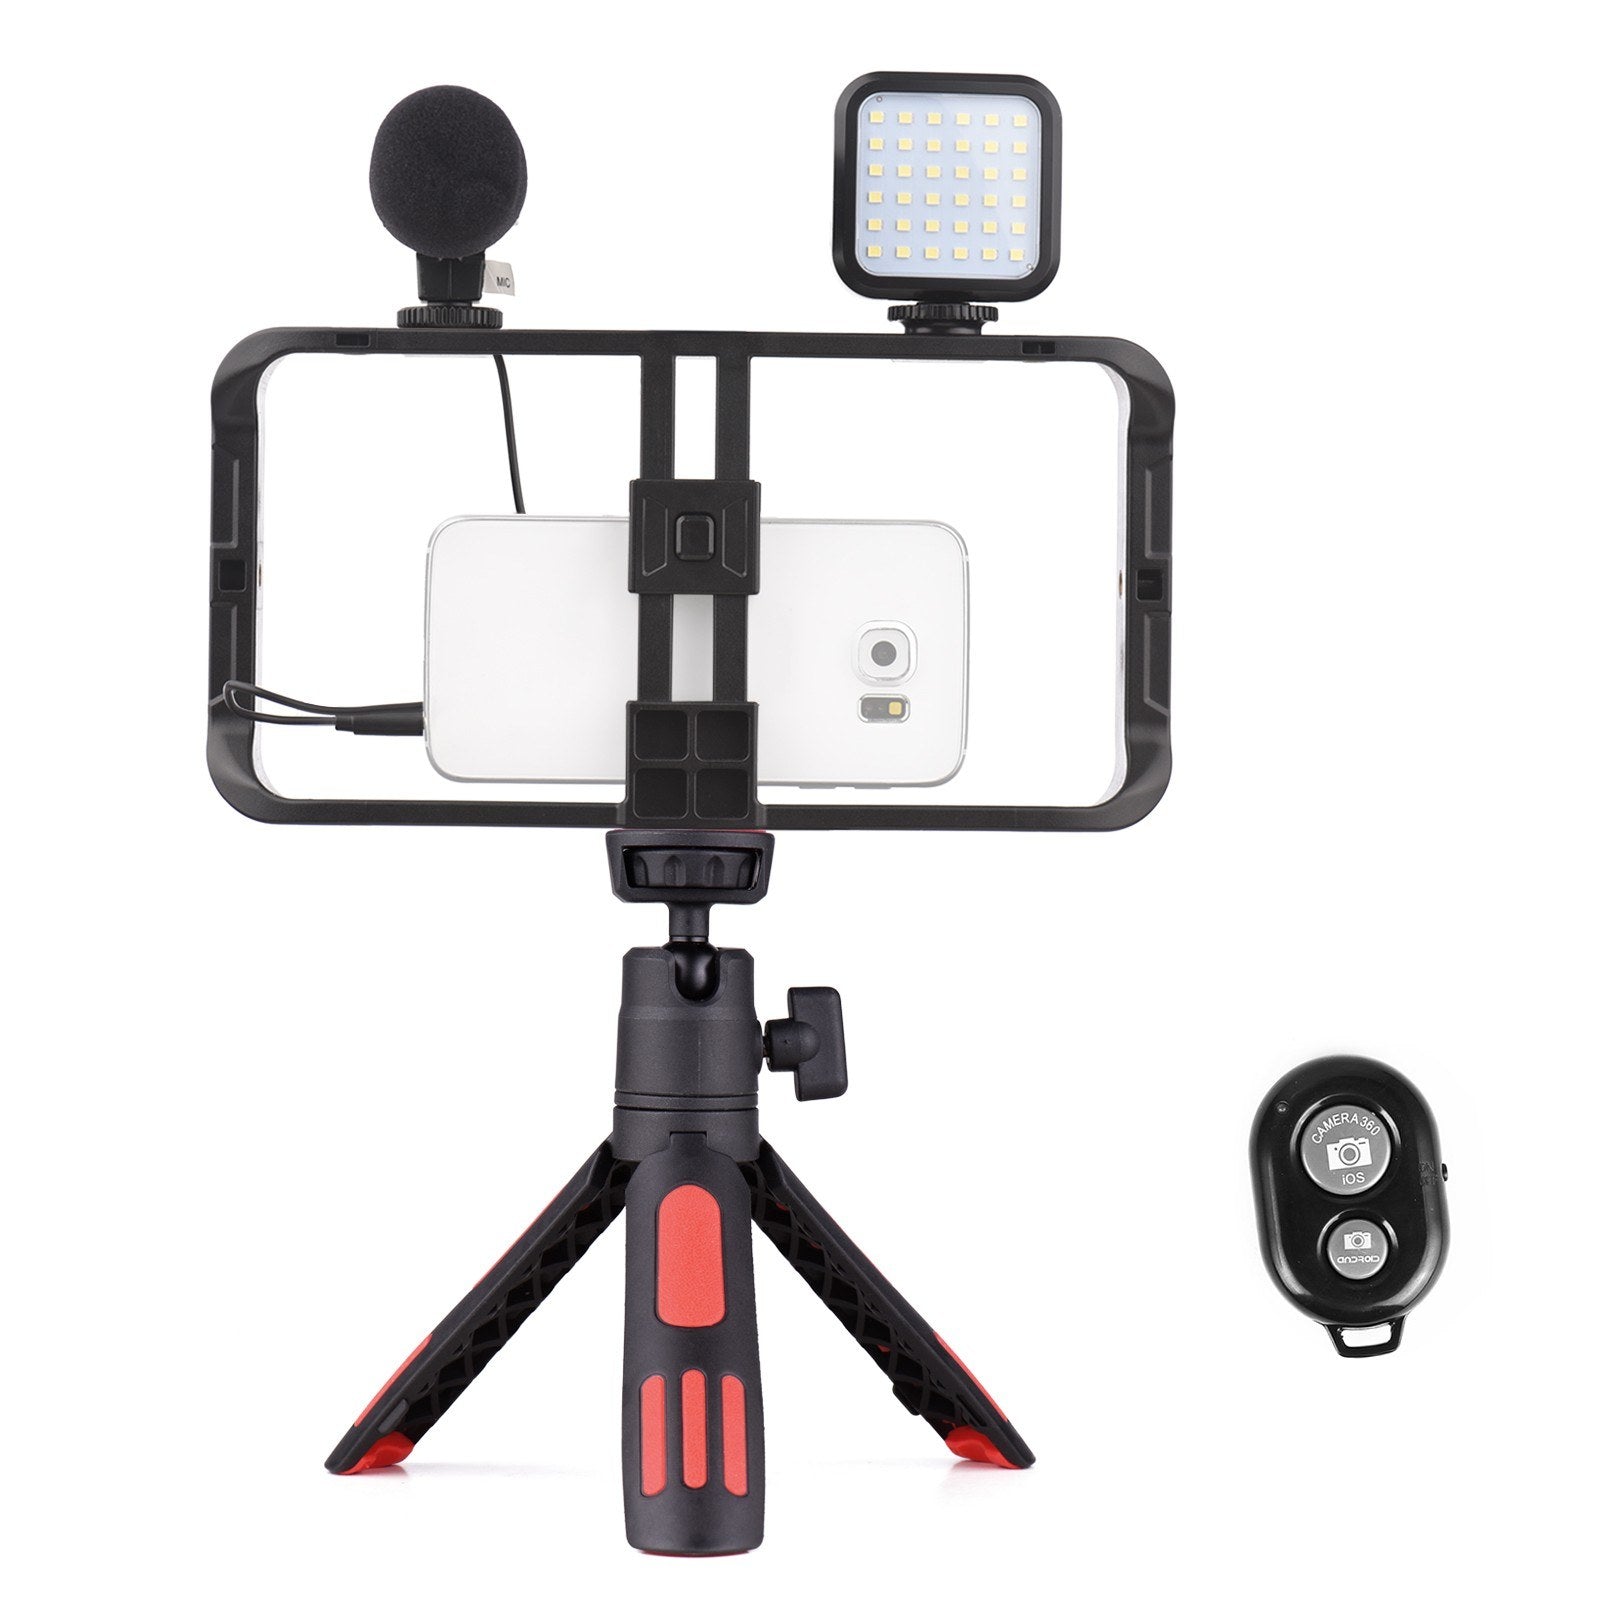 Andoer Dual Handheld Phone Cage Vlog Kit LED Video Light + Cardioid Microphone + Phone Video Rig Stabilizer Grip + TRS to TRS/TRRS Audio Cable + Tripod + Remote Control